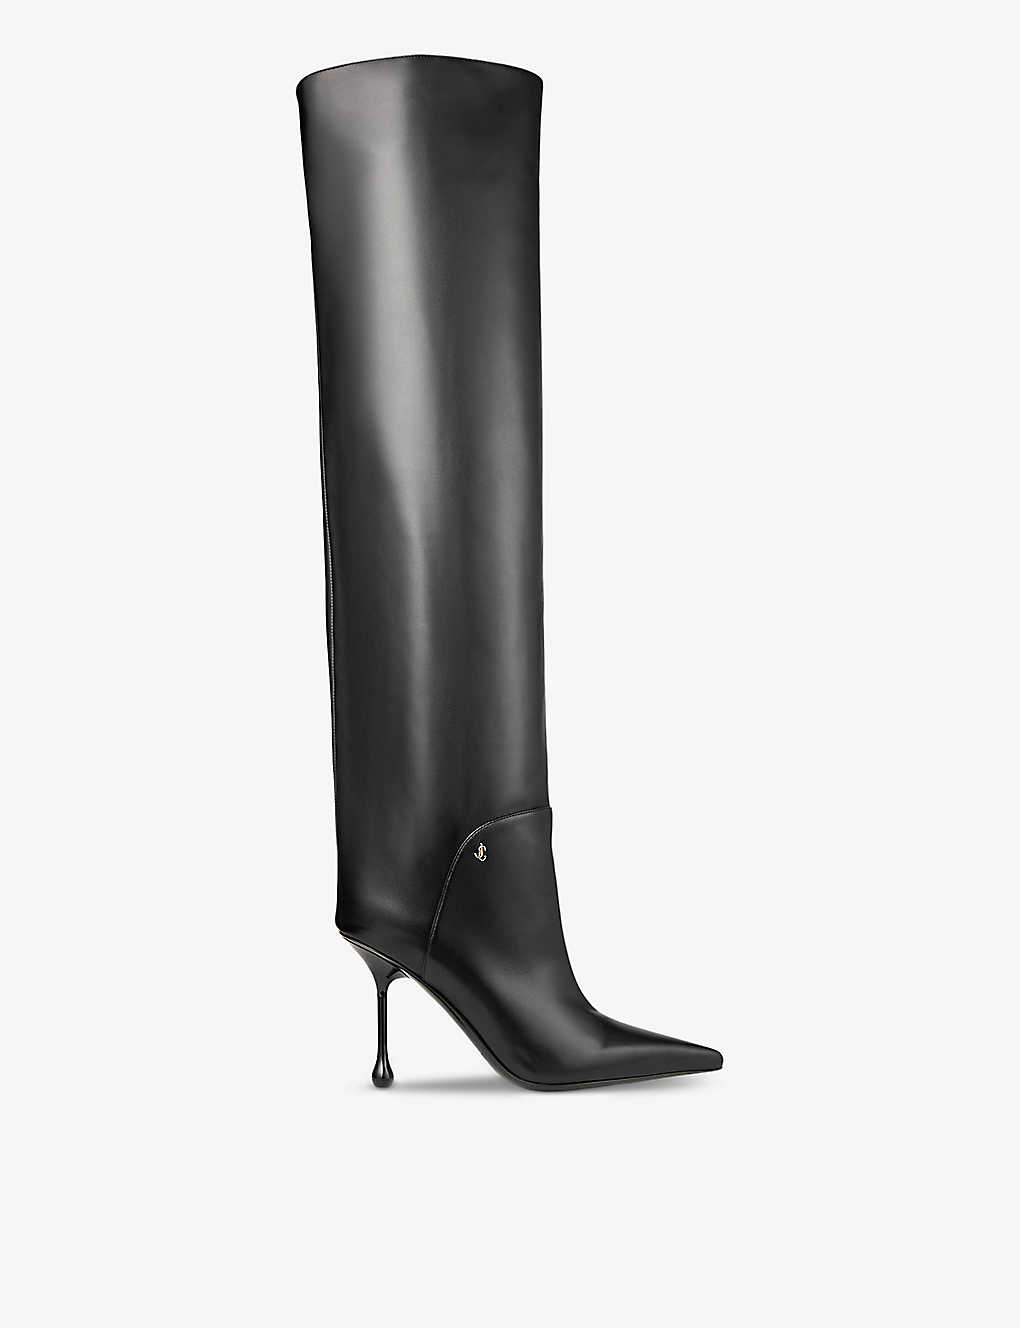 Shop Jimmy Choo Women's Black Cycas Pointed-toe Leather Heeled Knee-high Boots